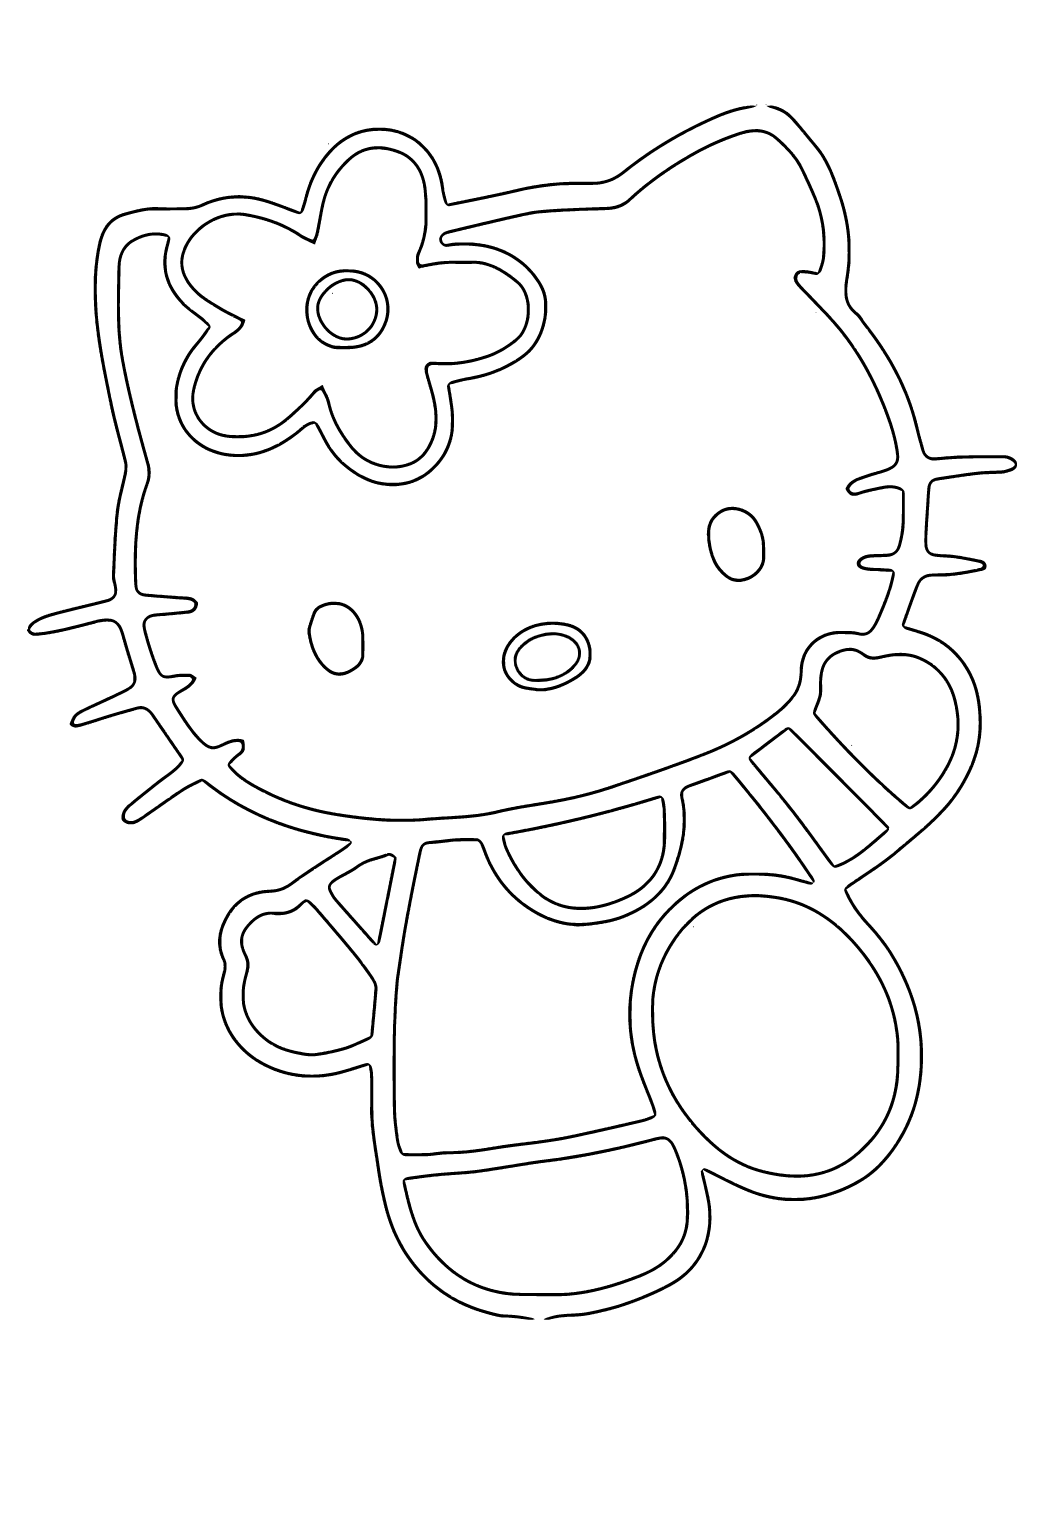 Free Printable Hello Kitty Easy Coloring Page for Adults and Kids 